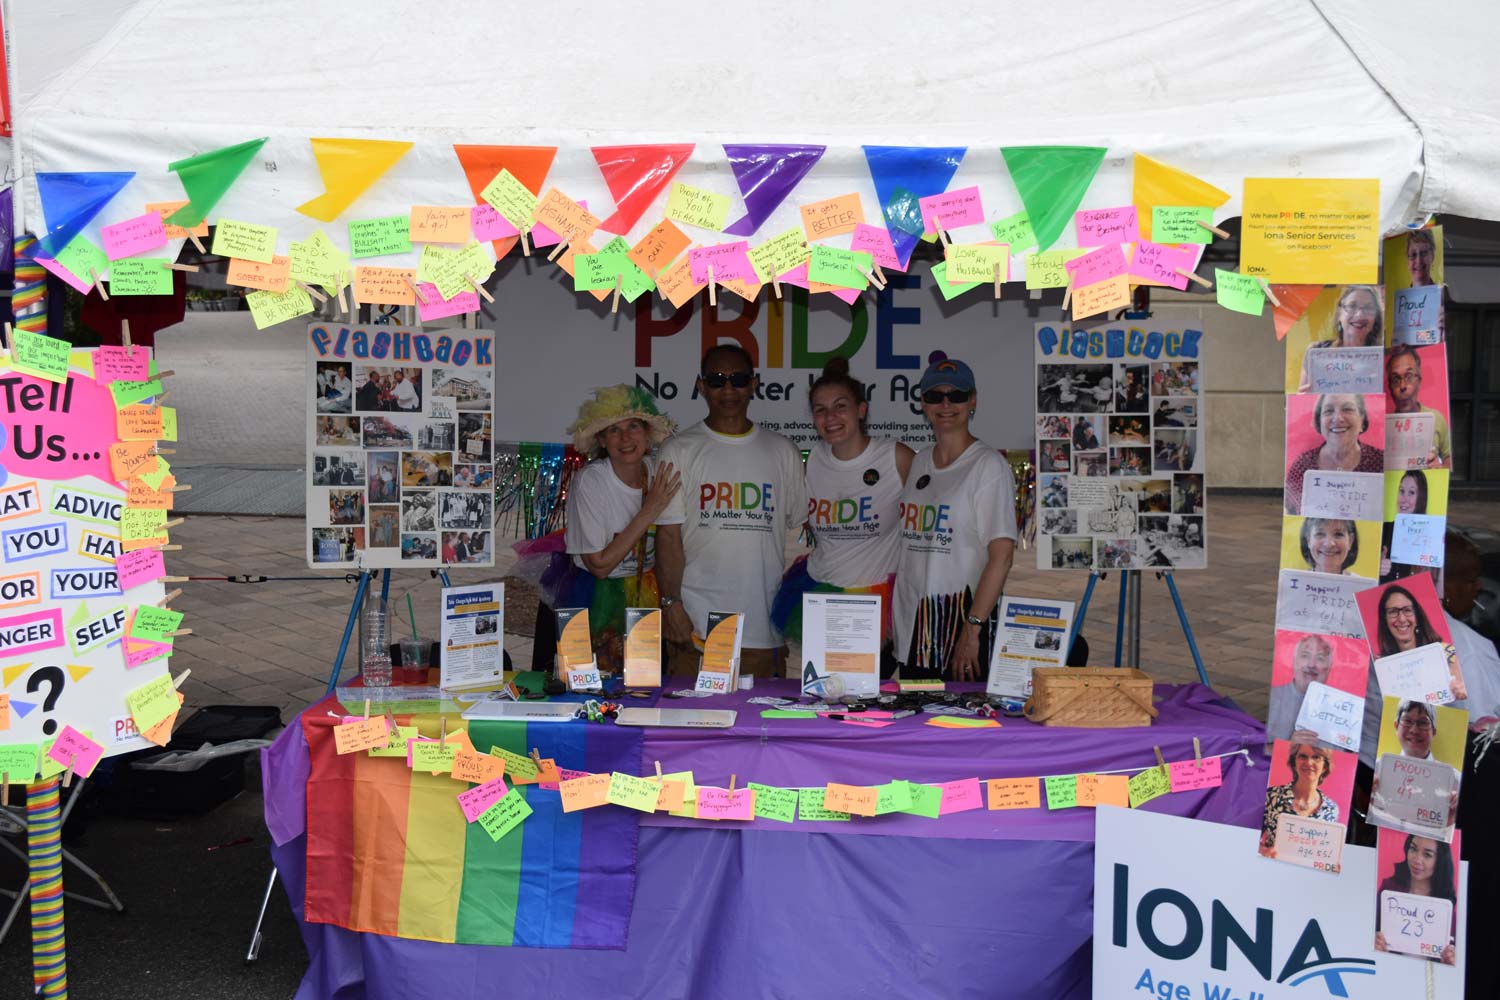 Iona hosted our very first booth in the Capital Pride Festival in June 2015. We asked attendees to share advice to their younger selves and received more than 200 responses!